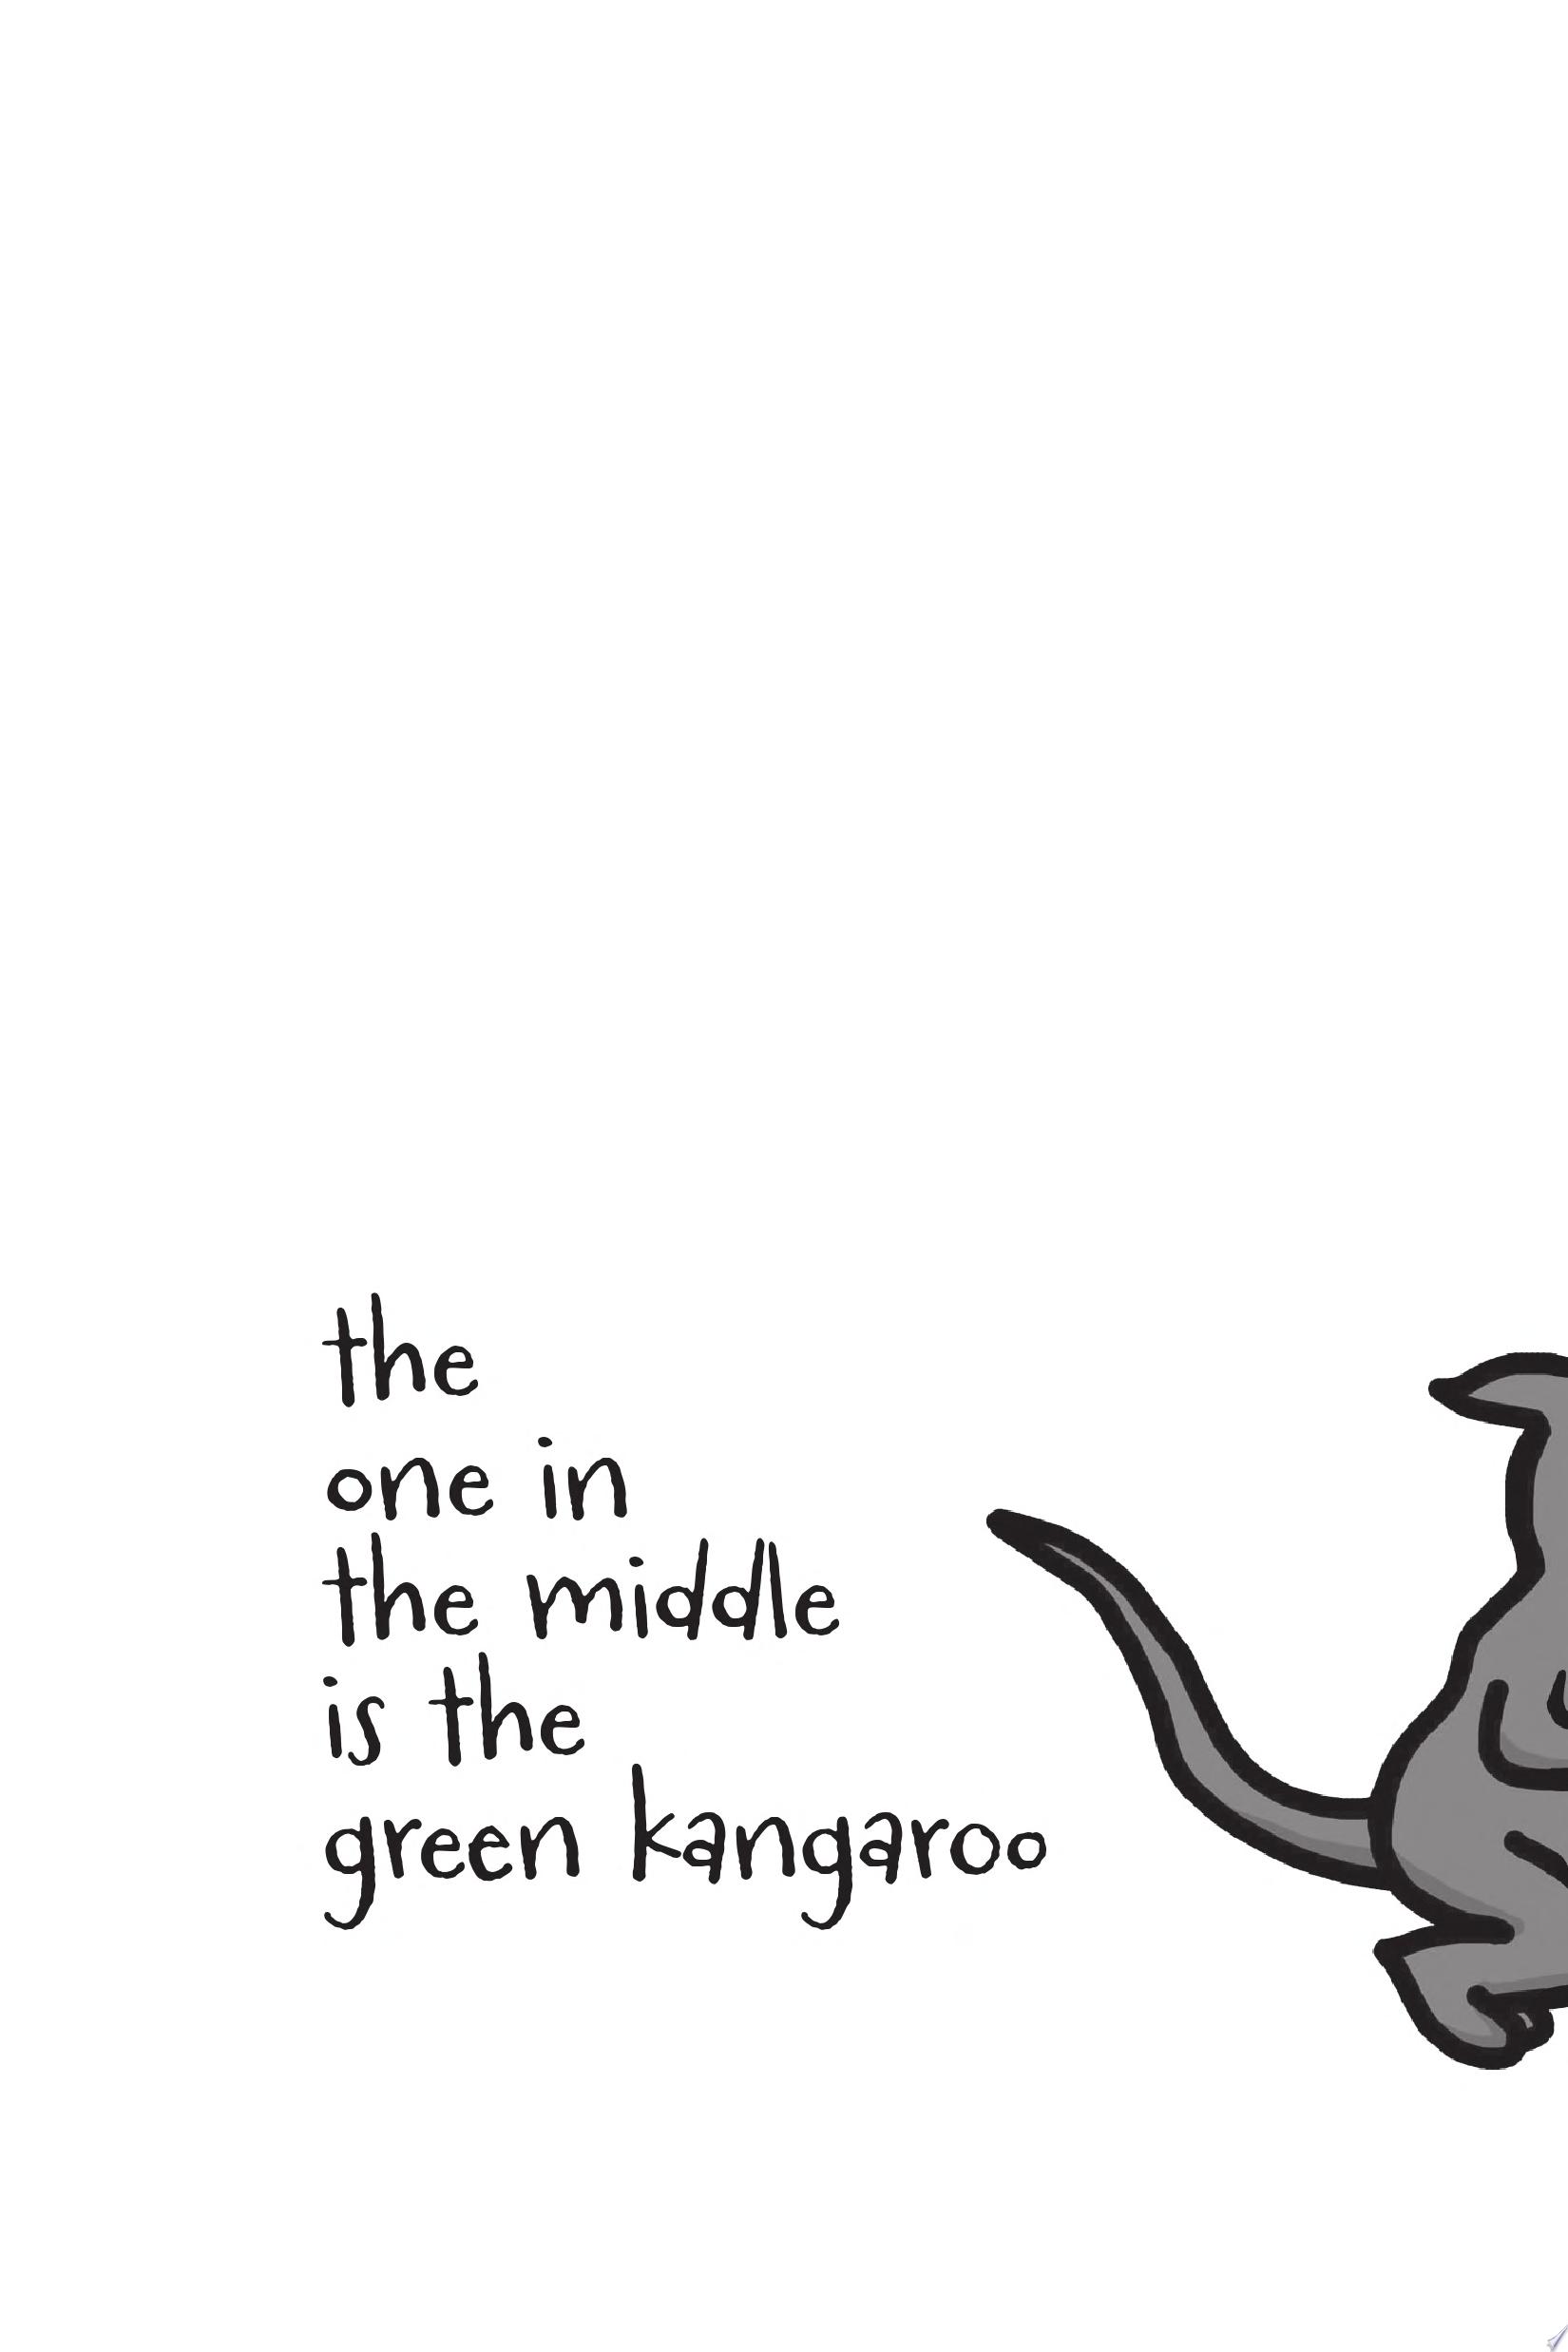 Image for "The One in the Middle Is the Green Kangaroo"